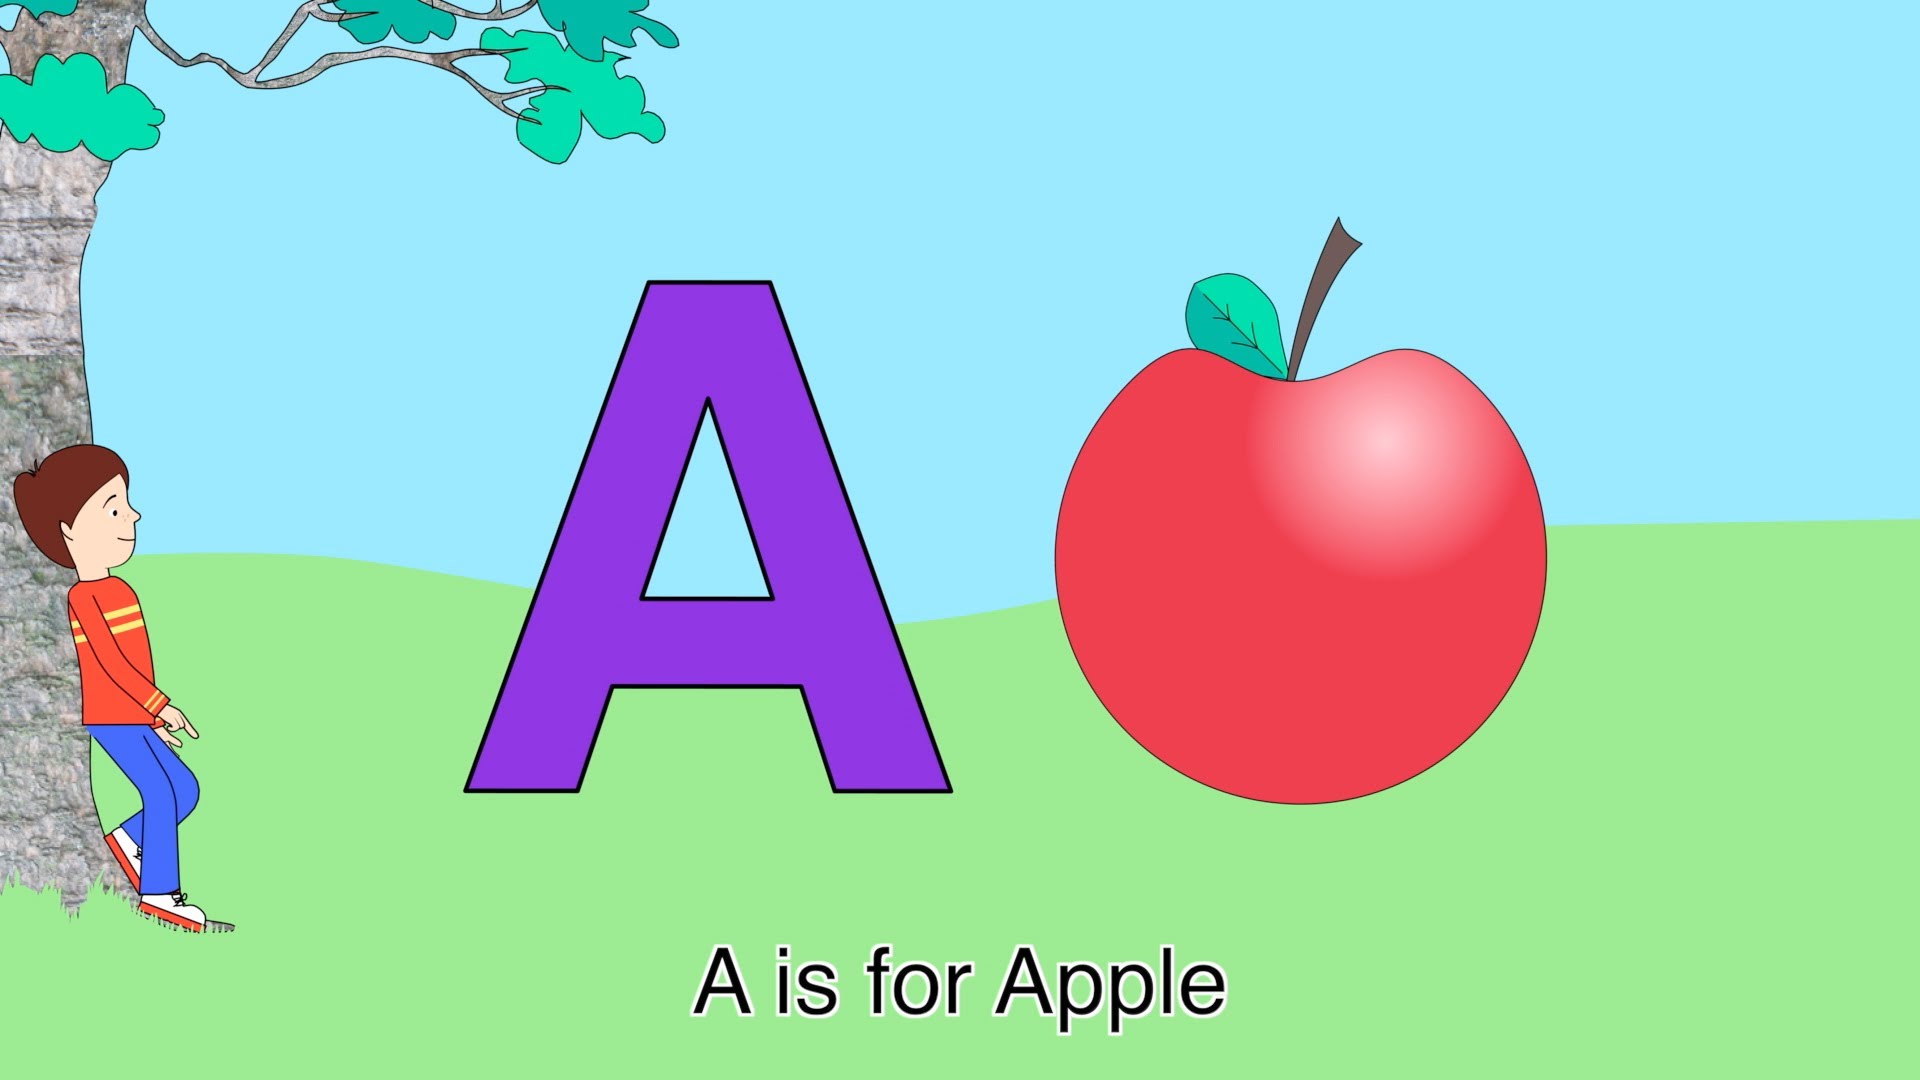 Best ABC Alphabet Song (A is for Apple) - YouTube